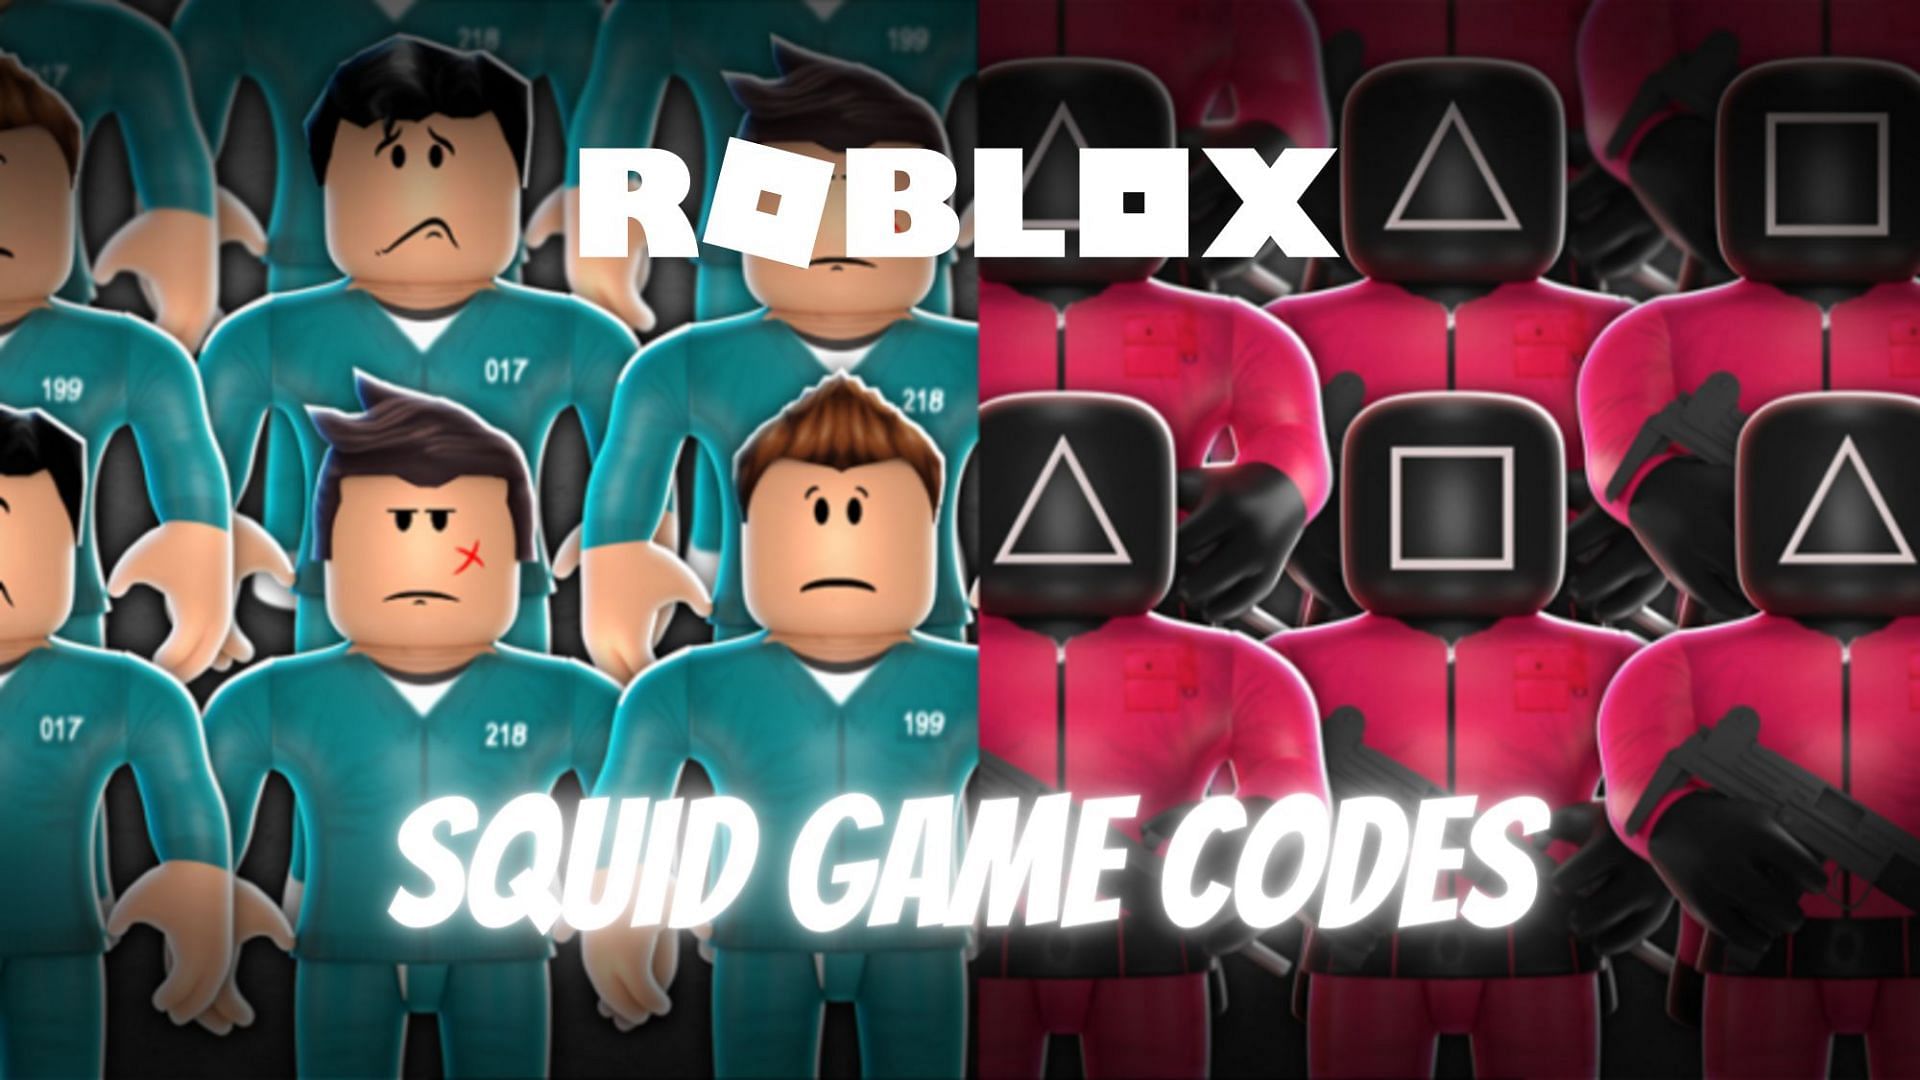 Squid Game Codes in Roblox Free Skins, Souls and more (May 2022)